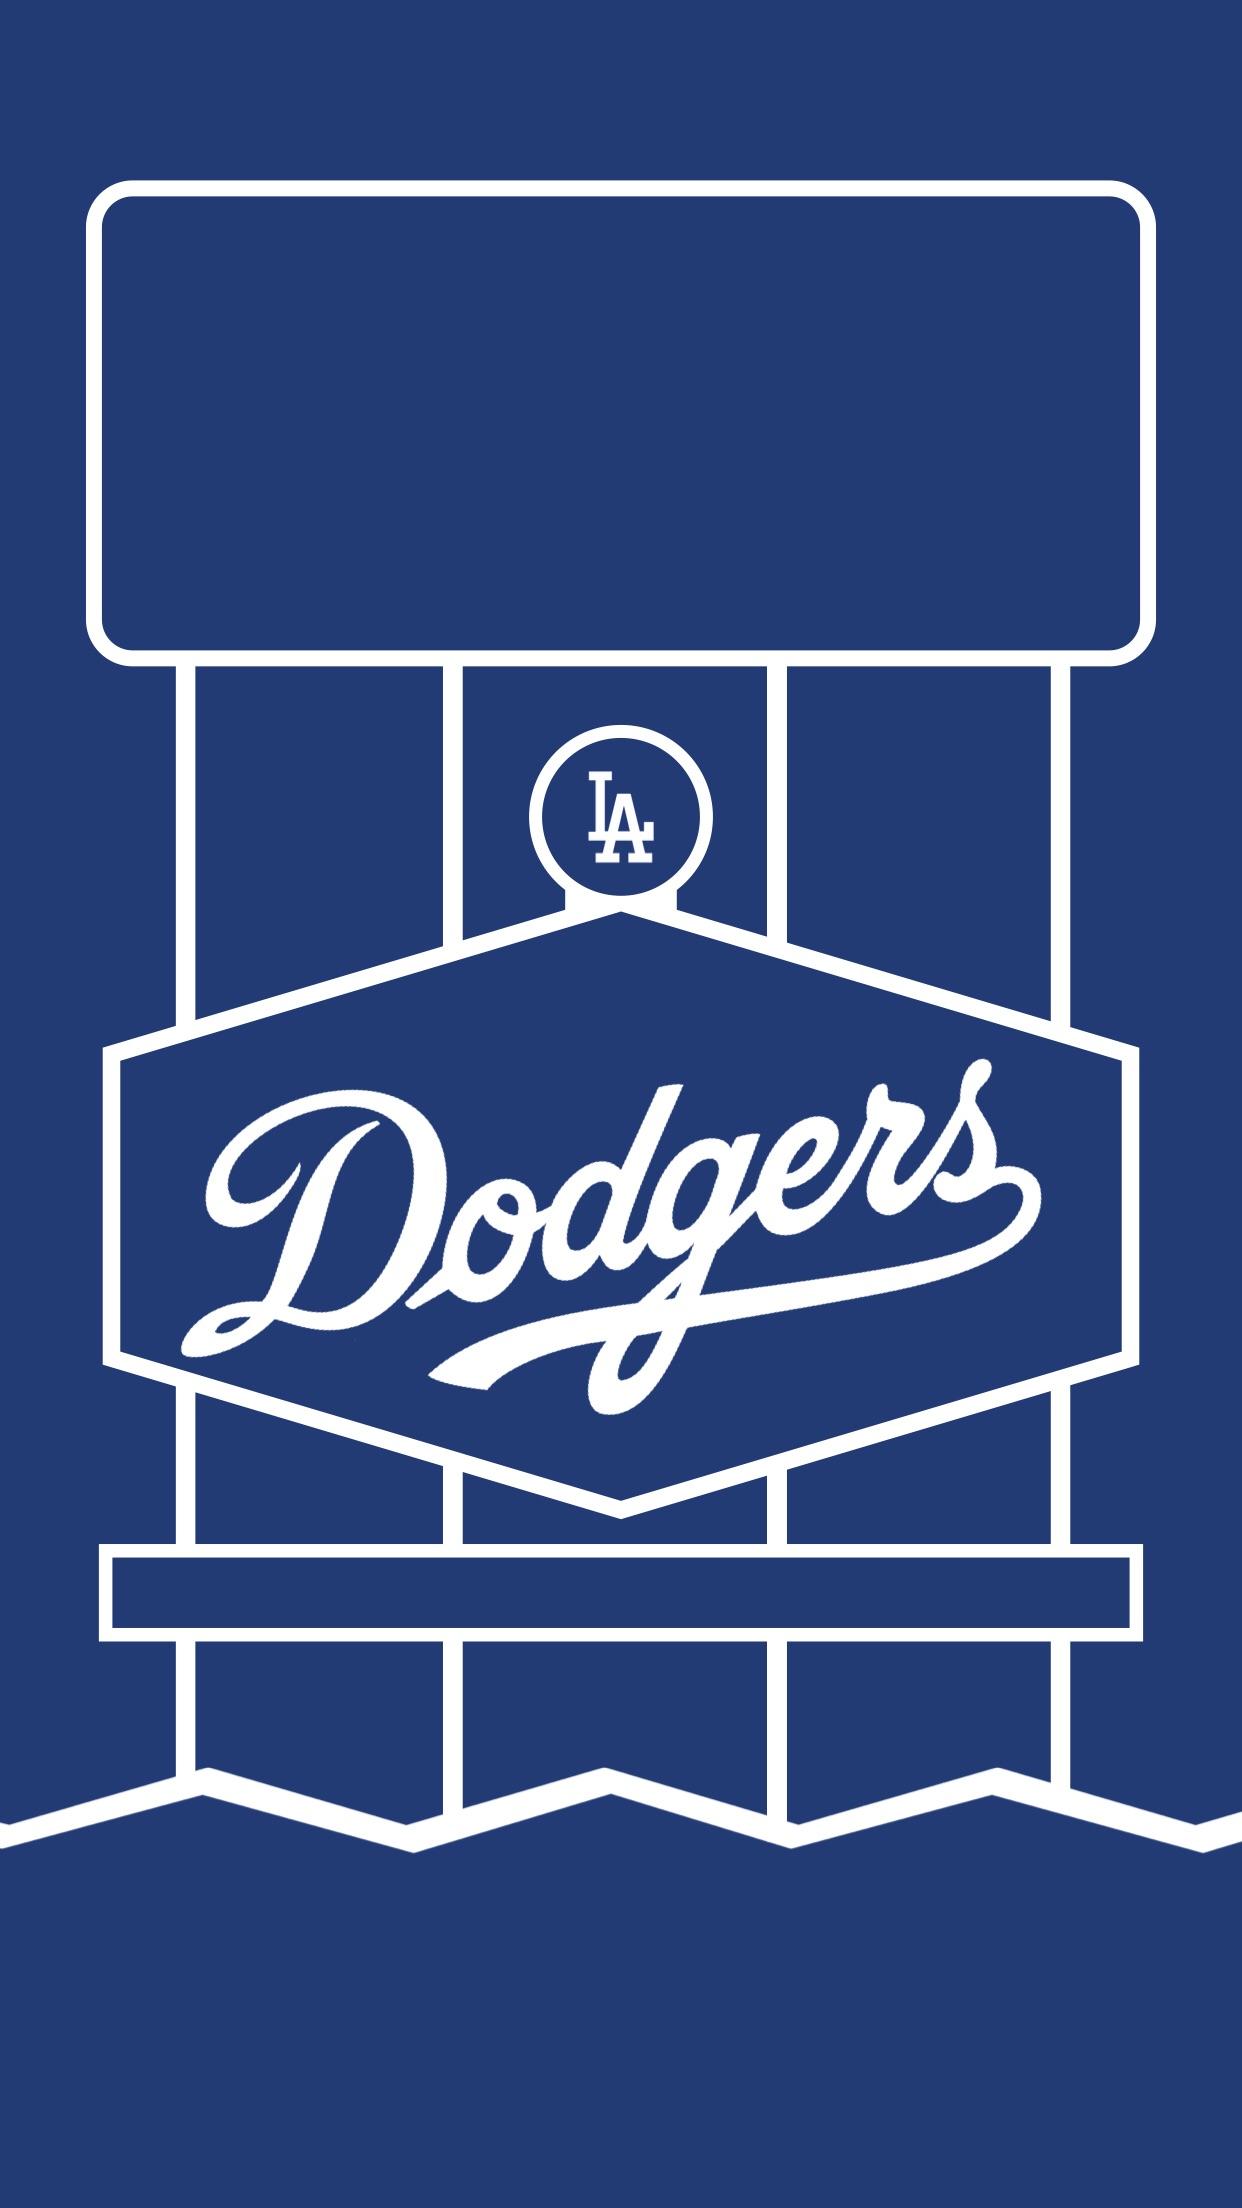 Dodgers Wallpaper for Cell Phones  Los angeles dodgers Dodgers Baseball  wallpaper